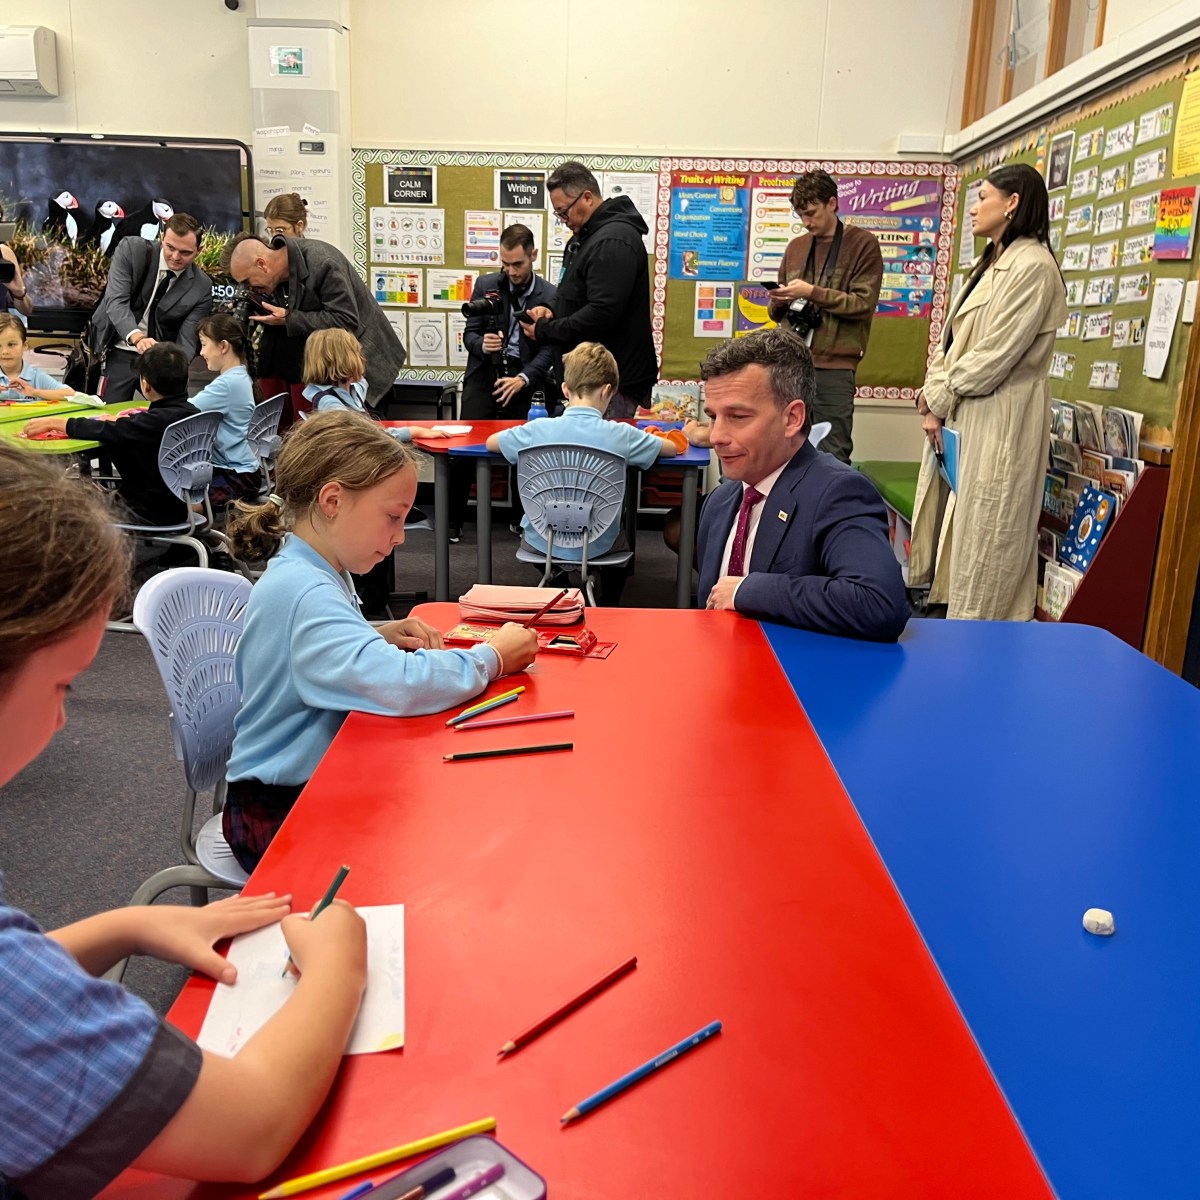 David Seymour – not the associate education minister you expected